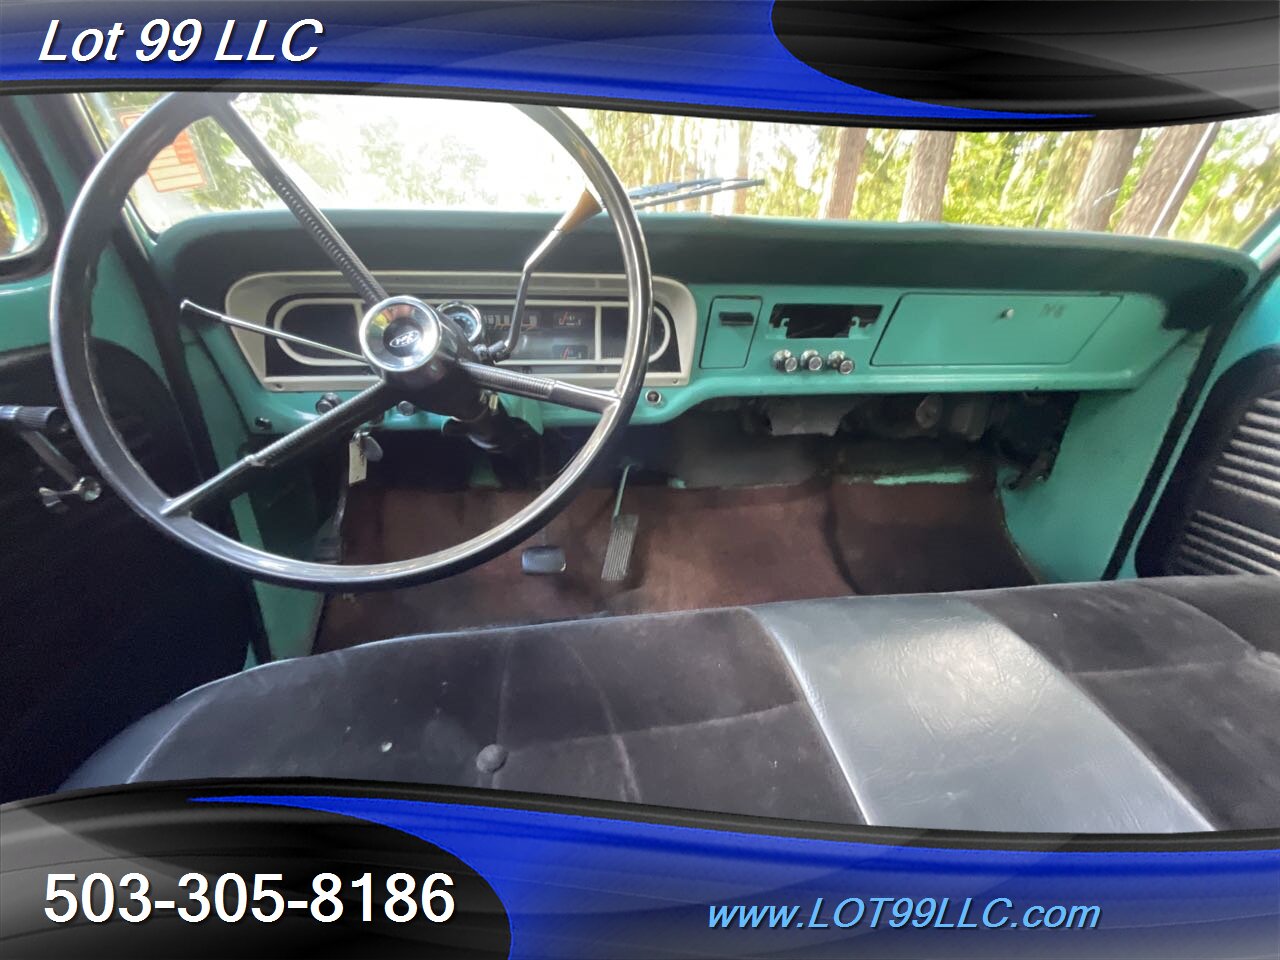 1967 Ford F-100 302 V8  Long Bed No Rust Solid Truck   - Photo 9 - Milwaukie, OR 97267